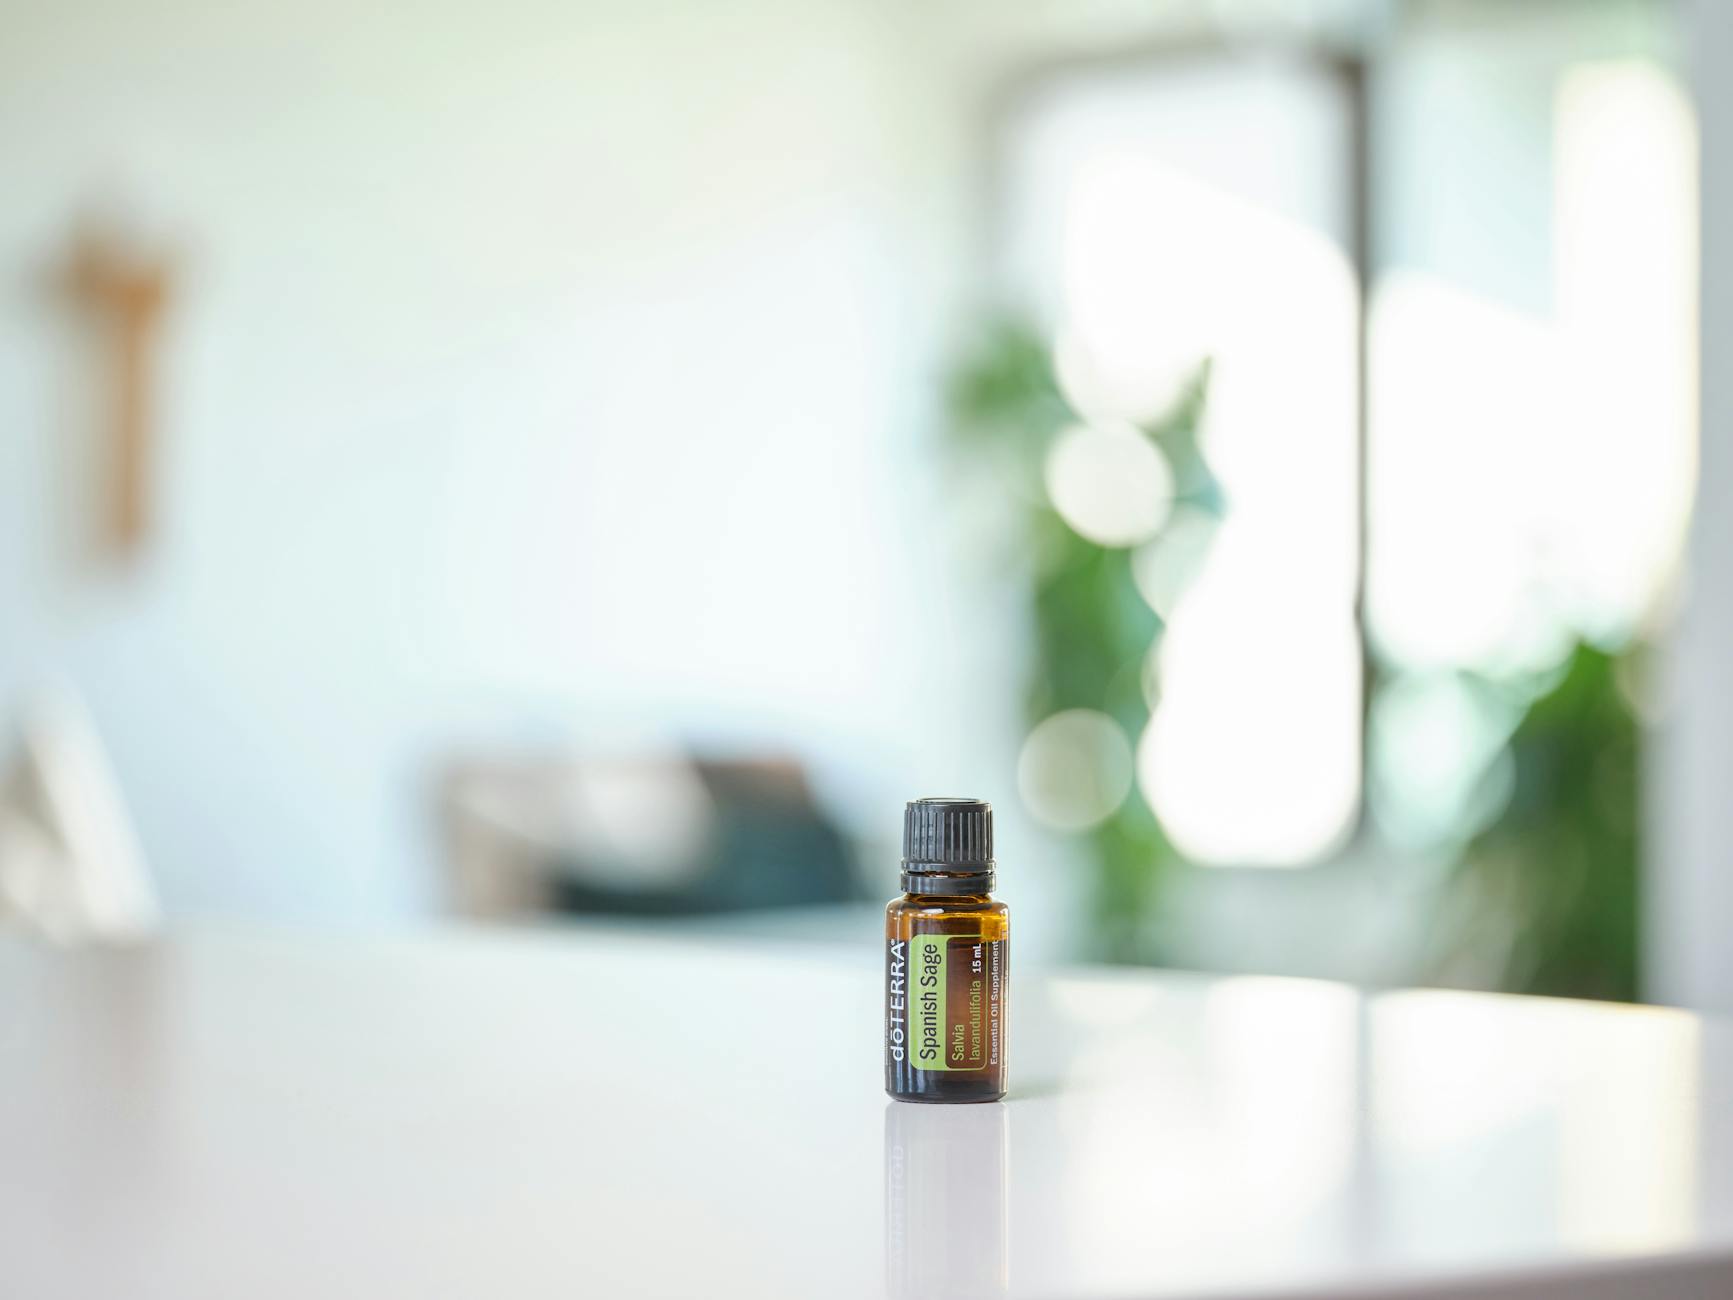 A bottle of essential oil sitting on a table